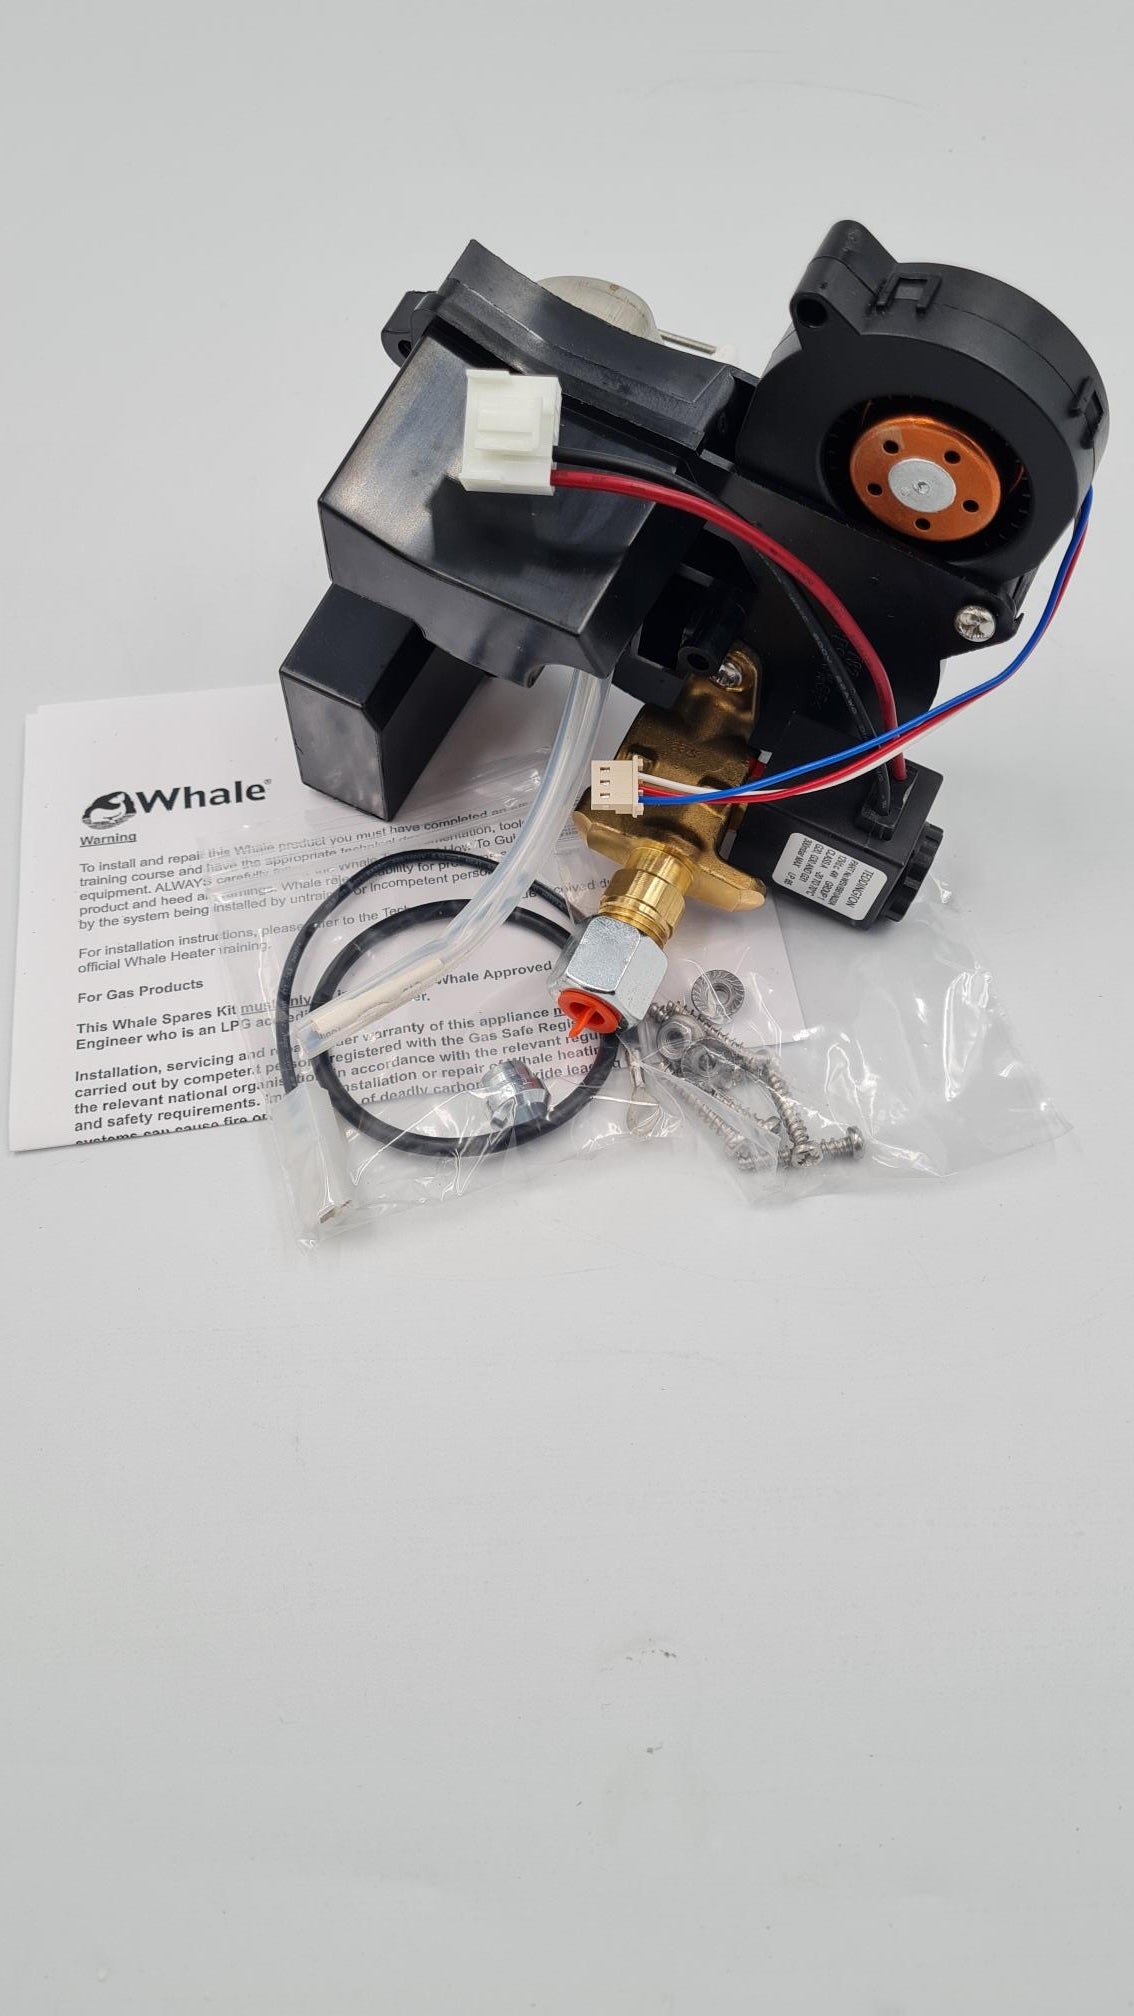 Whale Water Heater Expanse Burner Kit from 07/22 - AK1970